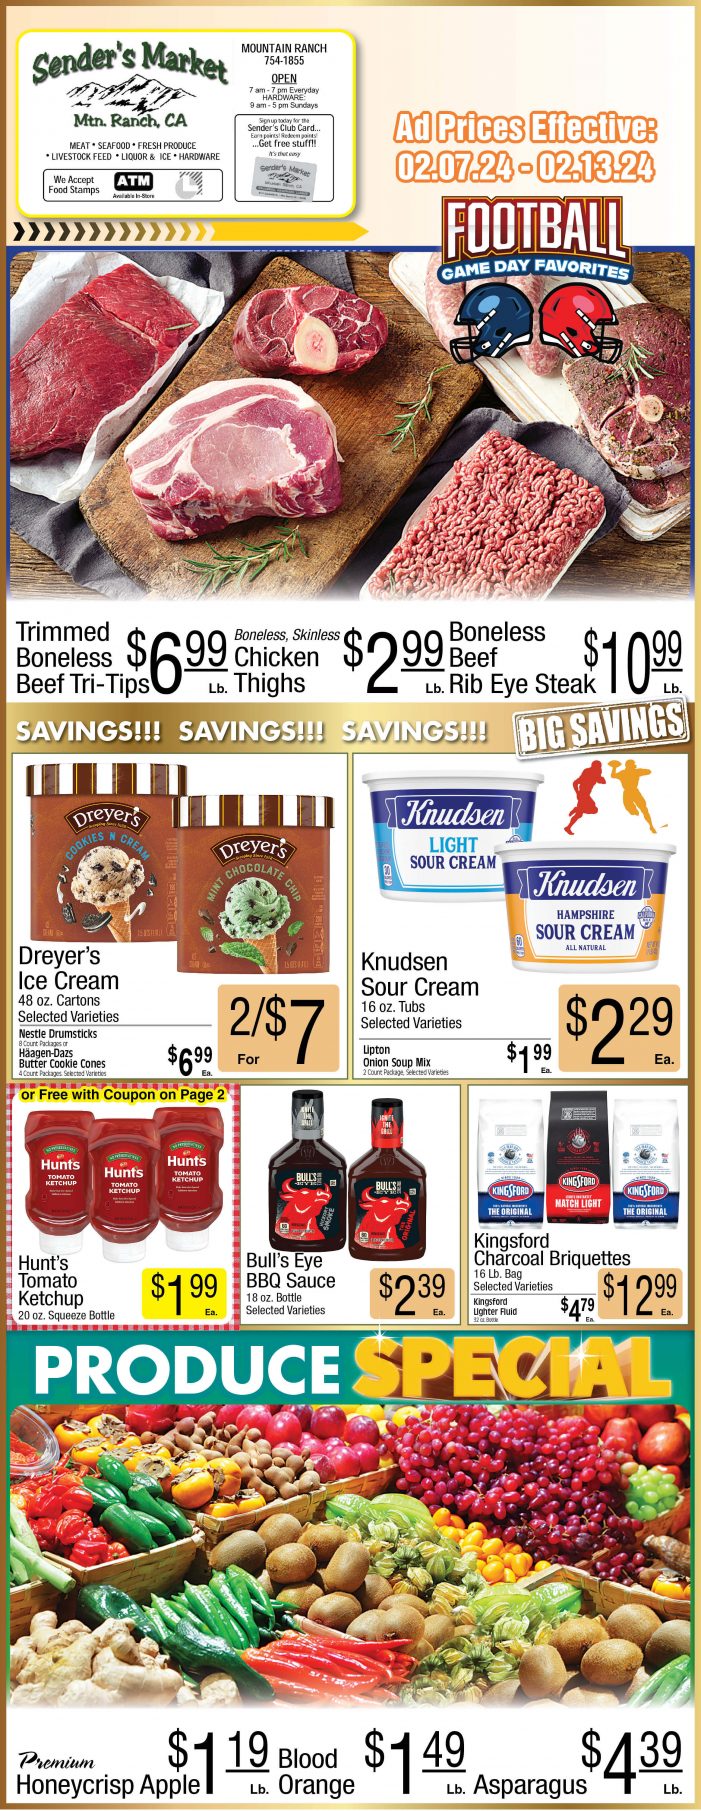 Sender’s Market Weekly Ad & Grocery Specials Through February 13th! Shop Local & Save!!